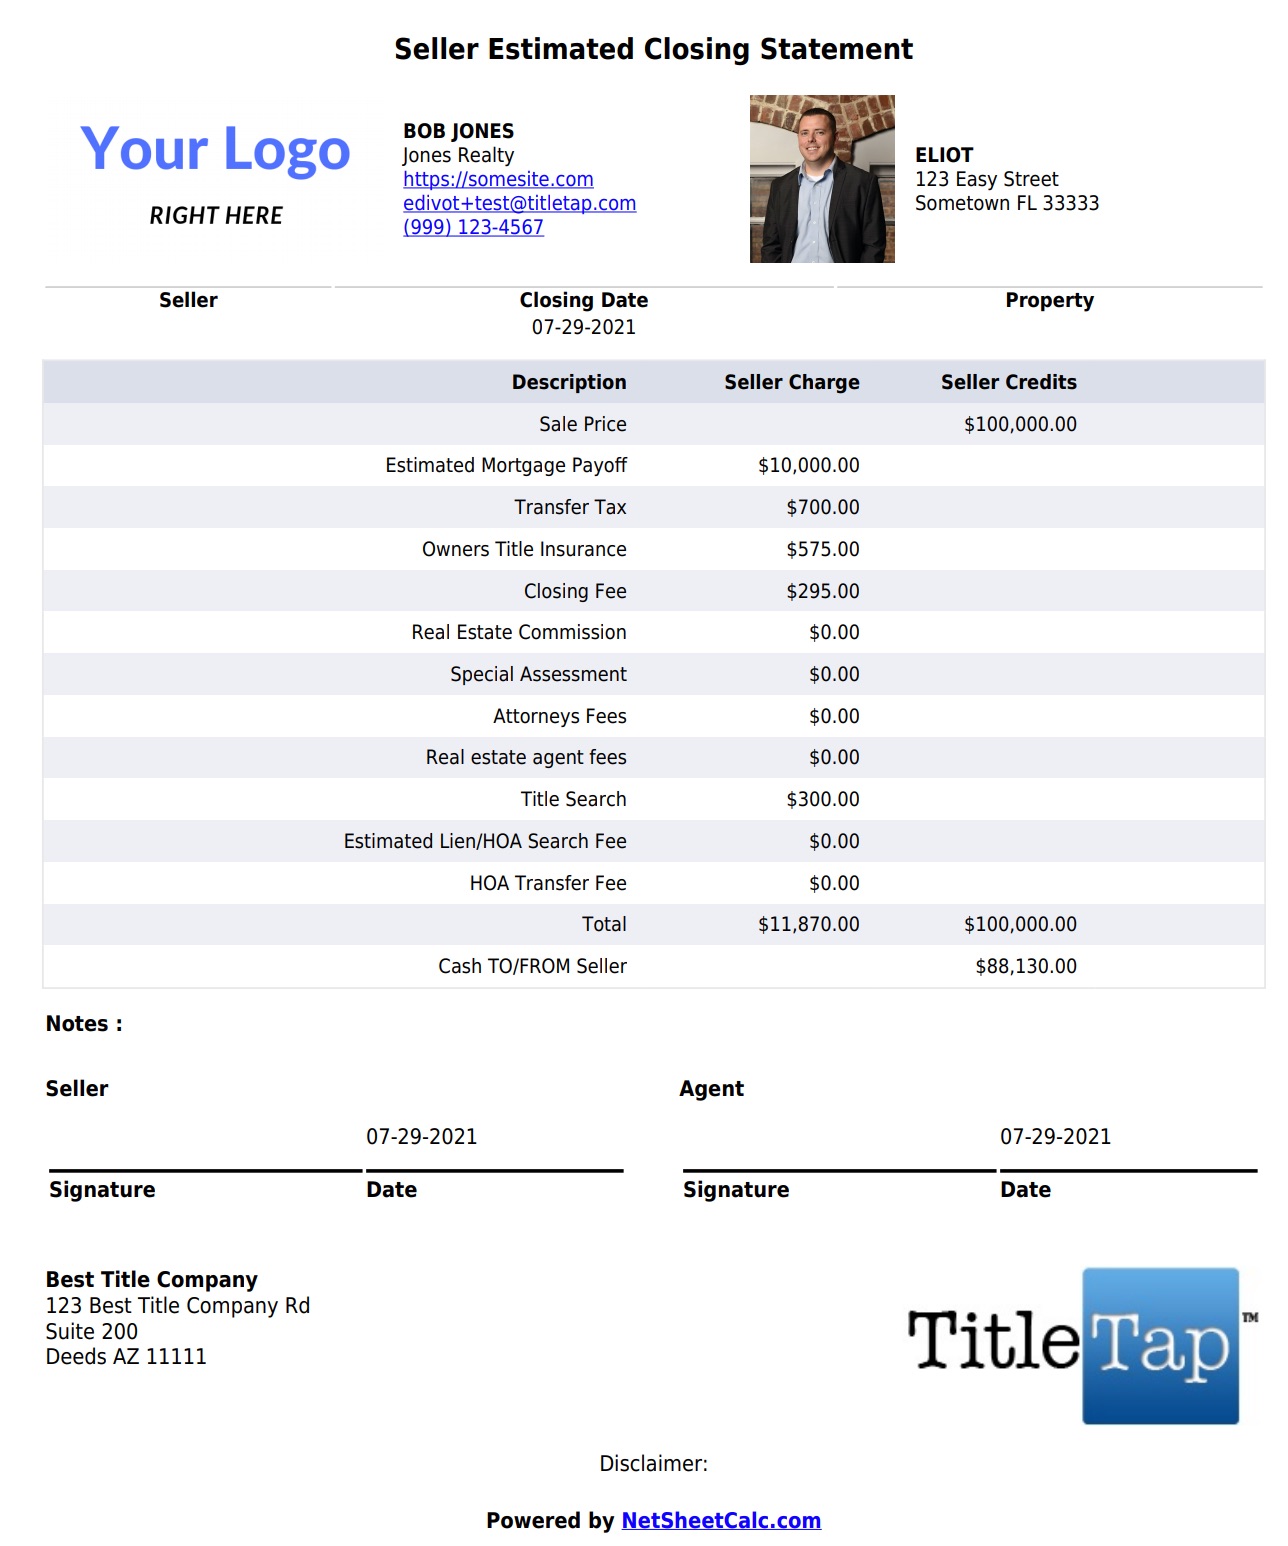 PDF Example: Co-Branded Title Company Net Sheet with Realtor